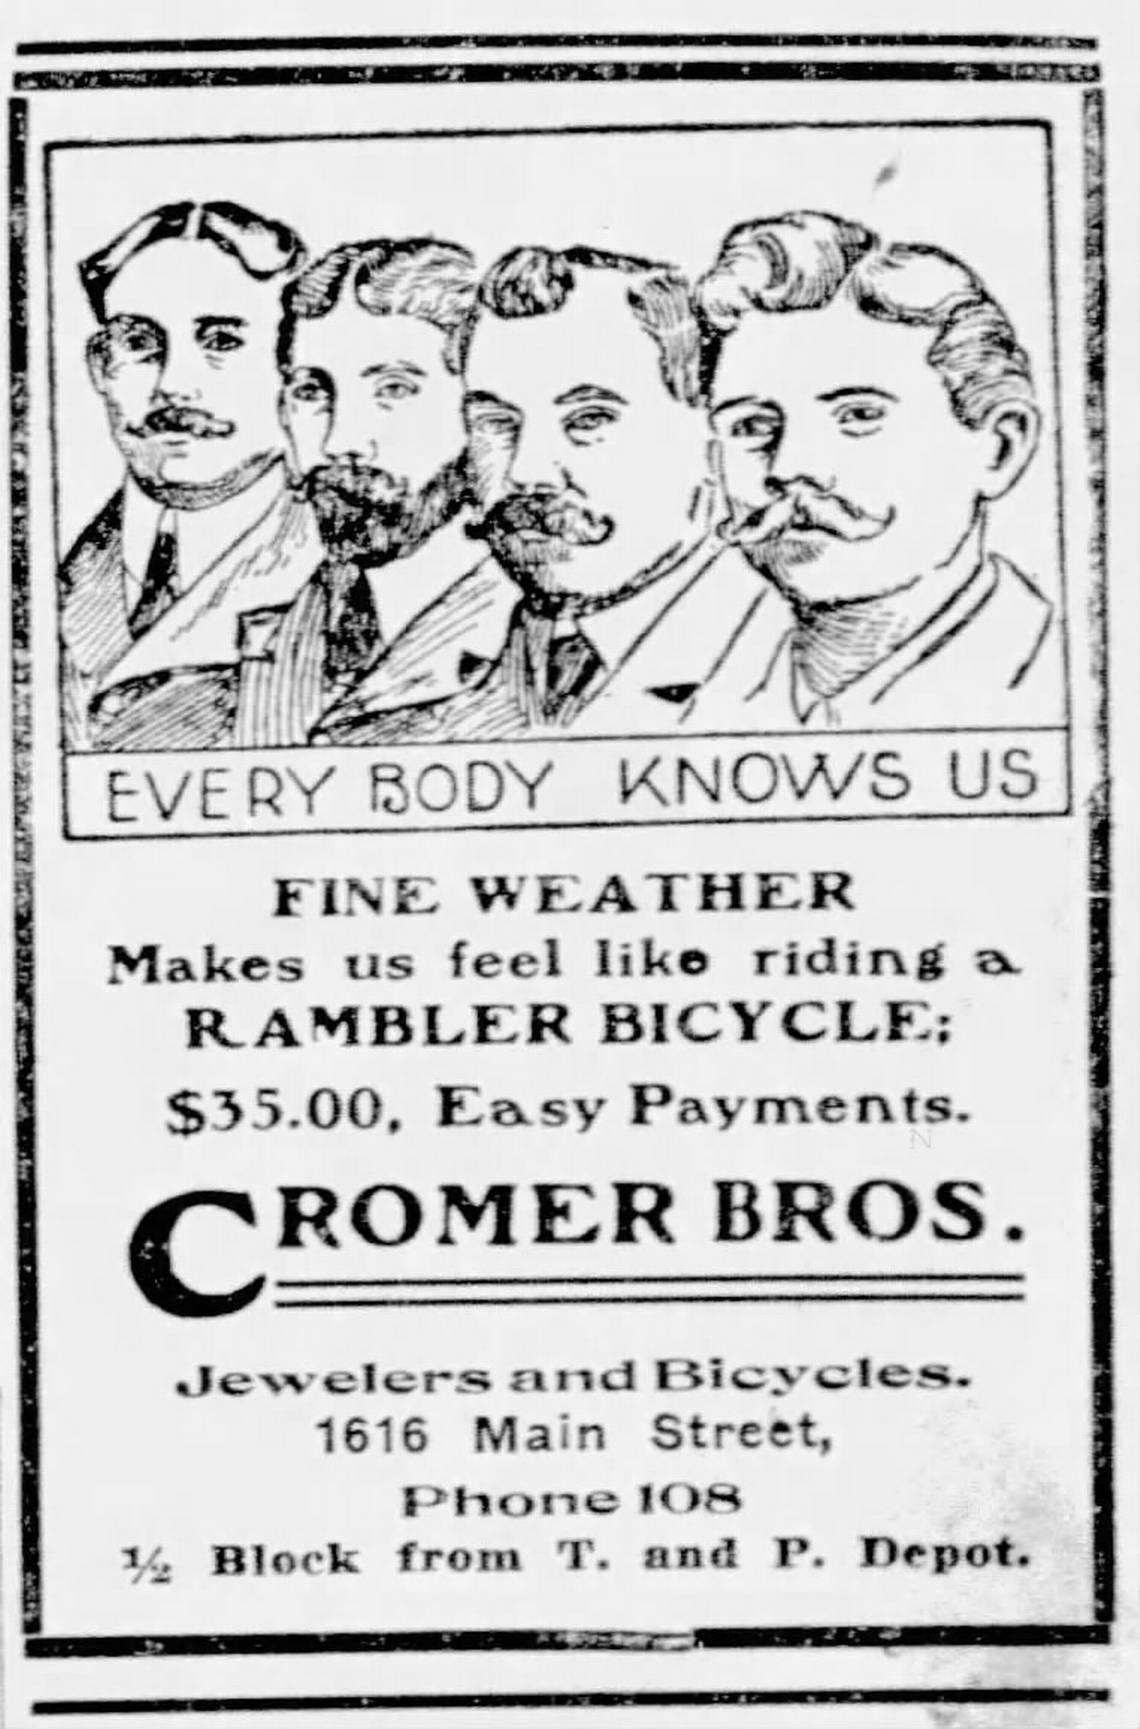 Henry R. Cromer built a successful business in bicycle sales and repair, with jewelry sales as an unusual sideline. His sons, depicted in this 1903 Star-Telegram ad, continued the bicycle and jewelry business after their father’s short-lived attempt to sell Rambler cars failed.